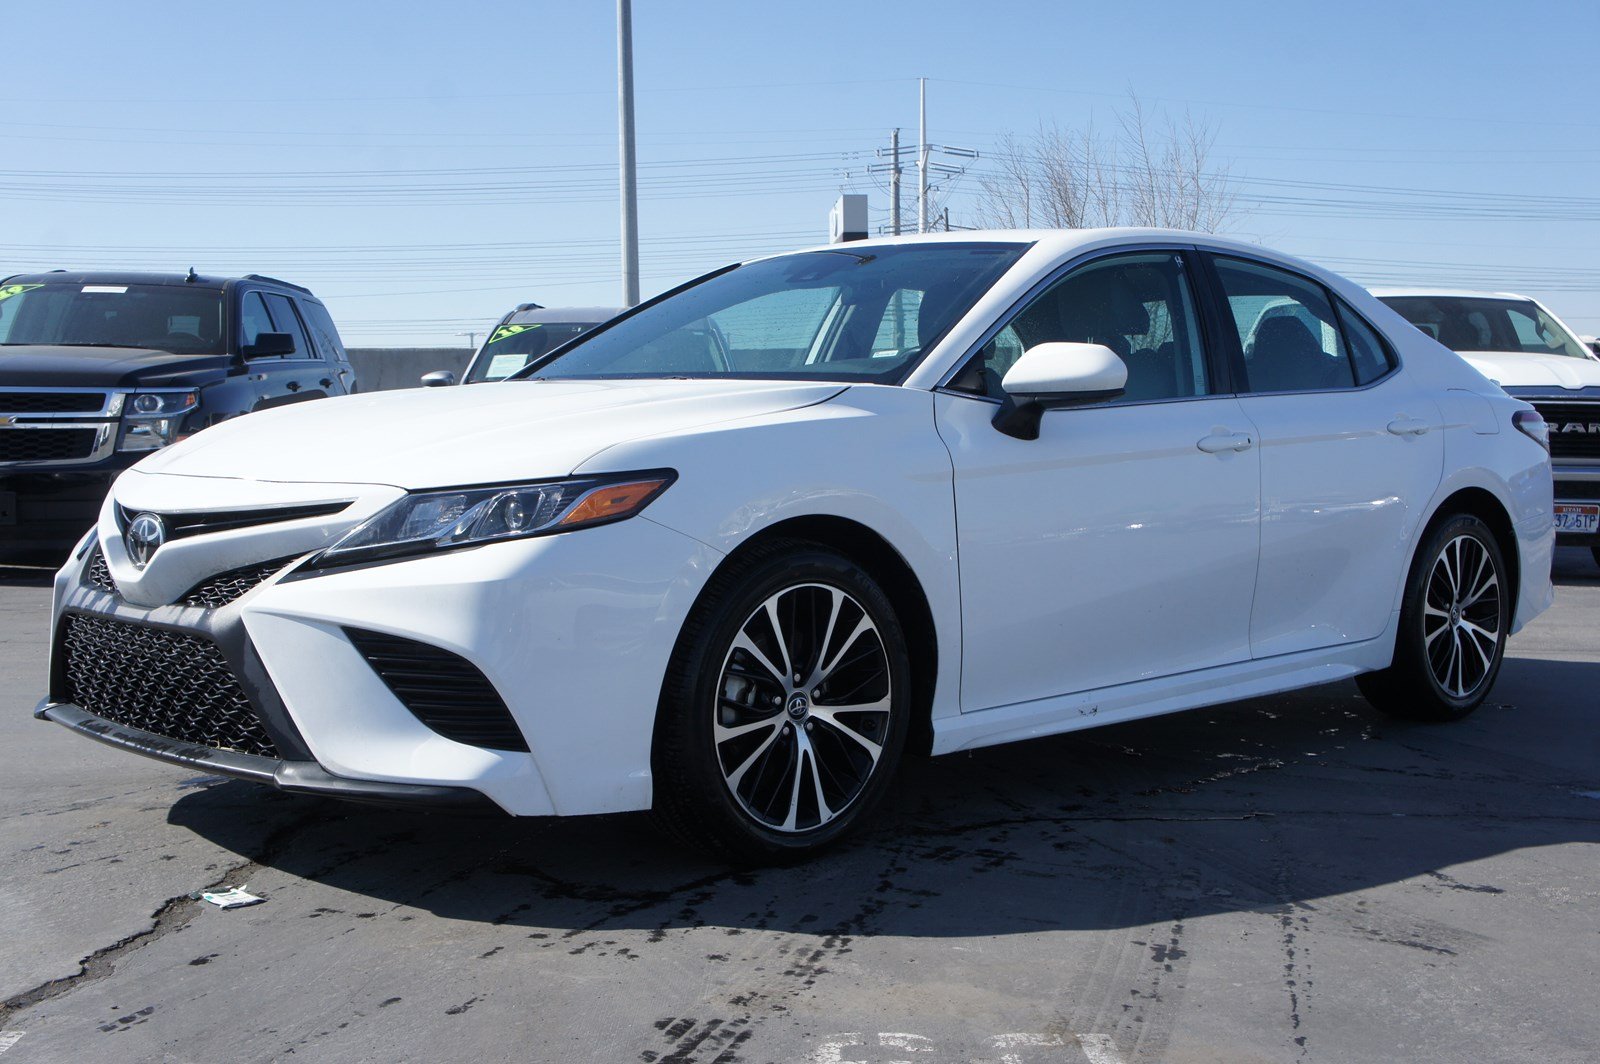 PreOwned 2019 Toyota Camry L 4dr Car in Murray S7782